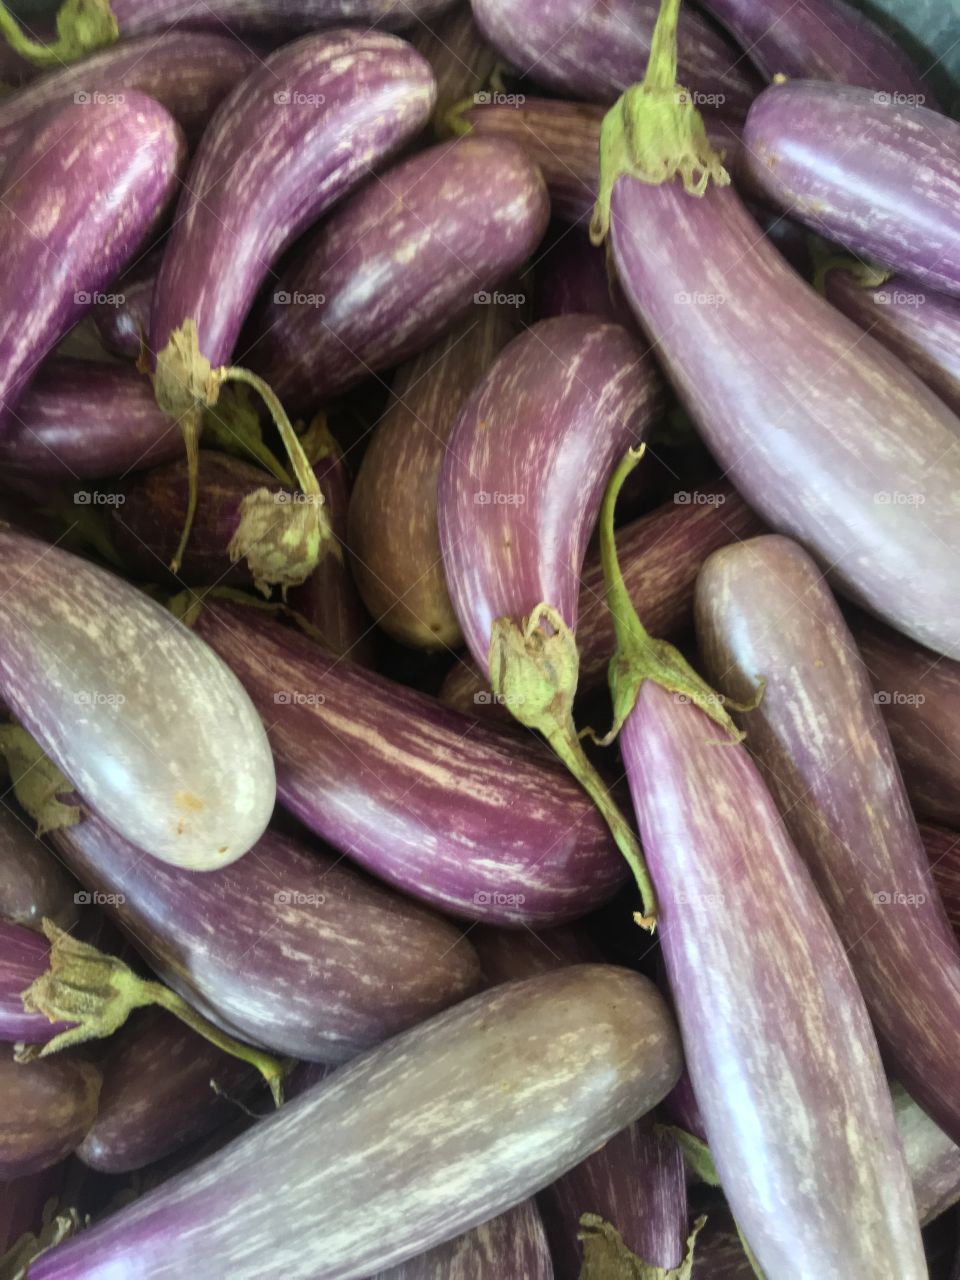 Eggplant for sale at the North Carolina State Farmers Market in Raleigh, North Carolina 